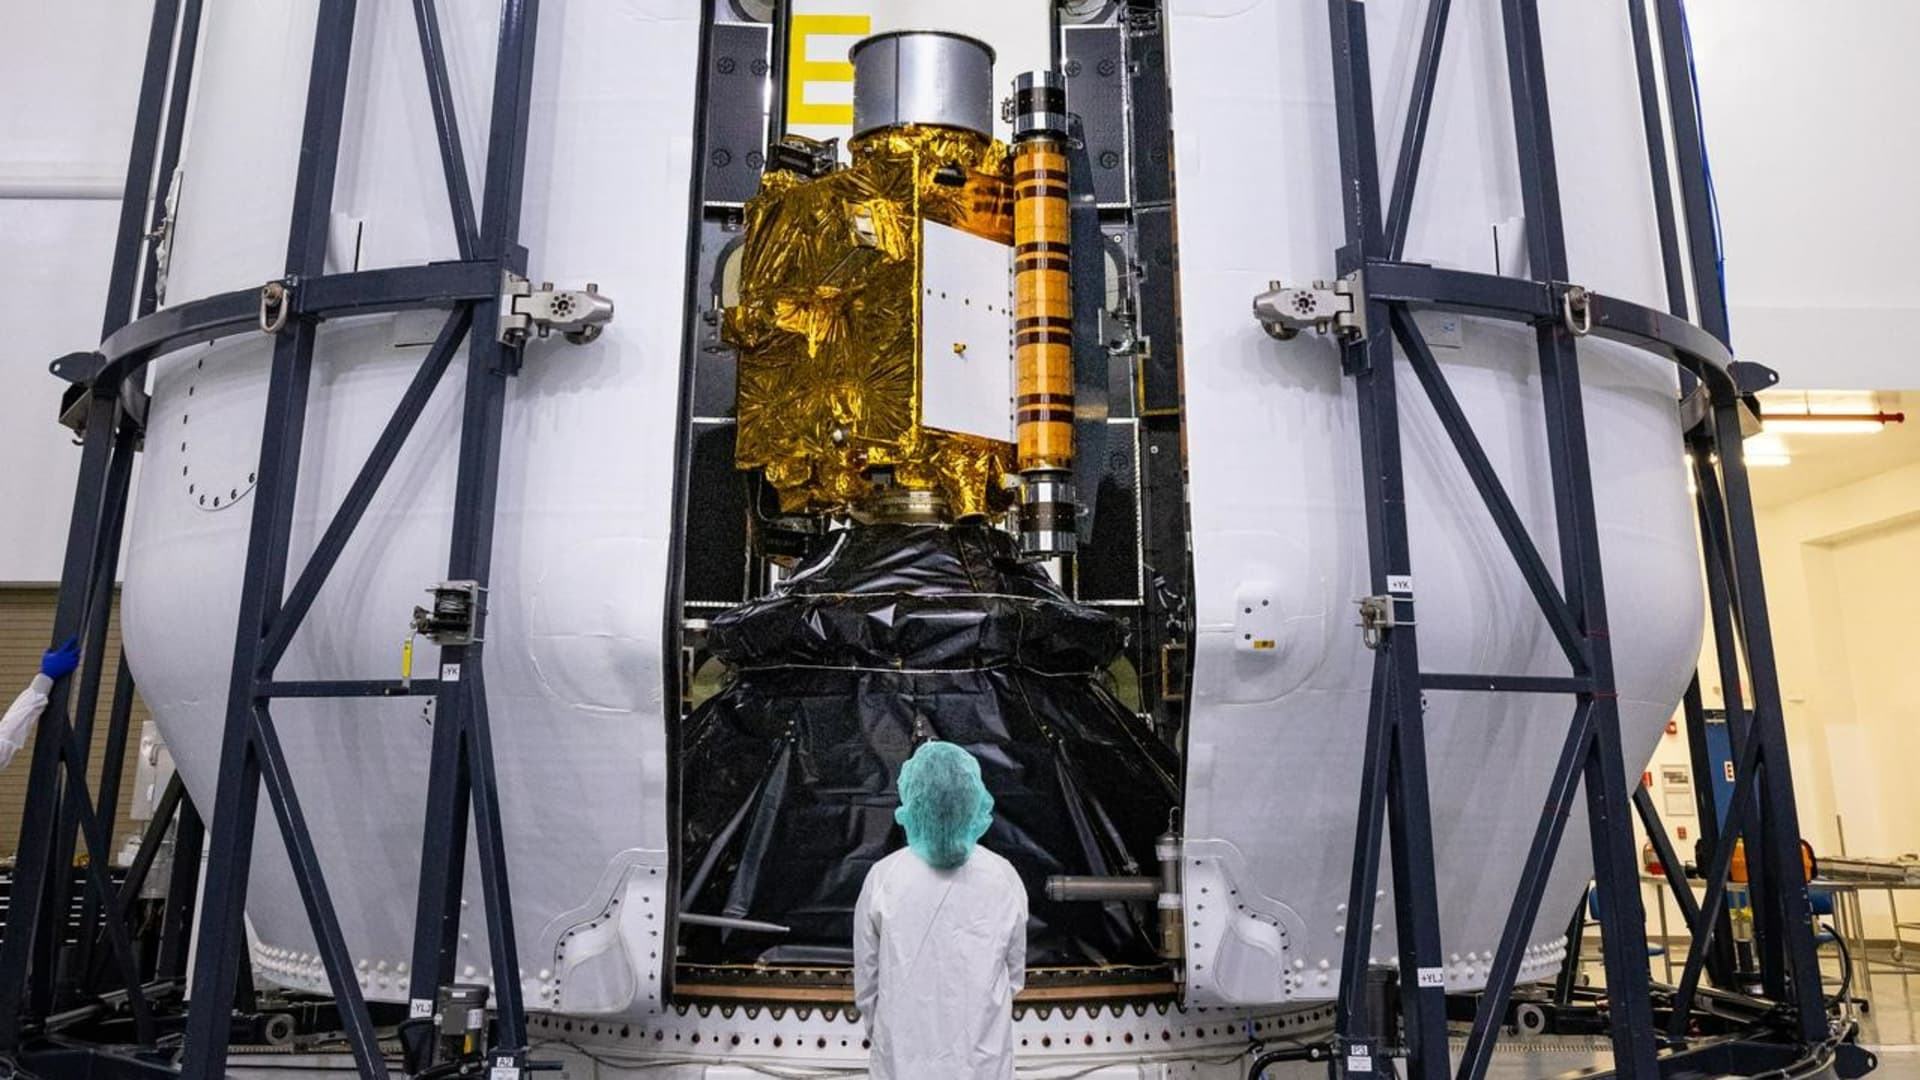 NASA's Double Asteroid Redirection Test (DART) spacecraft is put in the nosecone of SpaceX's Falcon 9 rocket in preparation for launch.